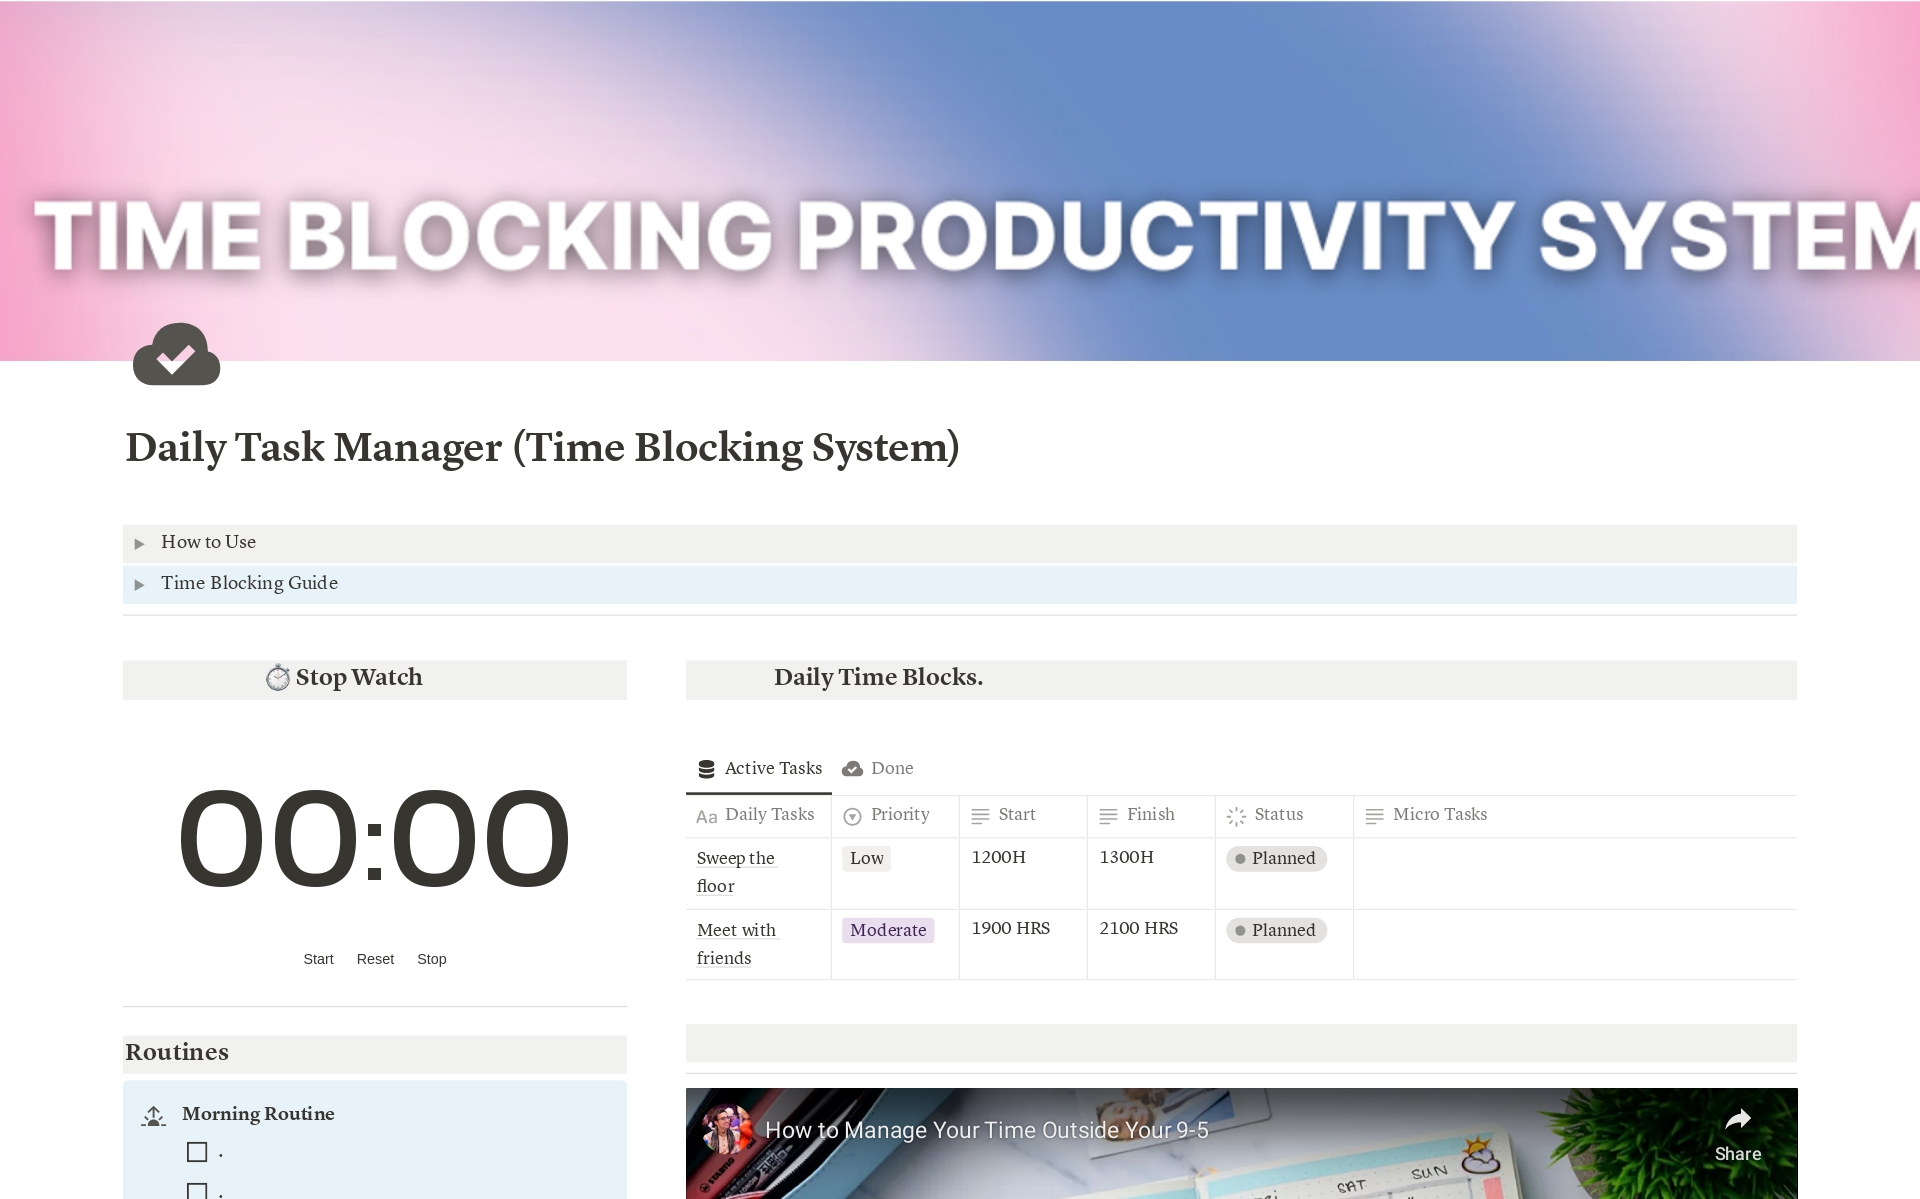 This Notion template offers a comprehensive system designed to streamline your daily tasks, enhance focus, and boost productivity like never before. Features: Daily Tasks Time Blocks, Time Blocking Guide, Weekly & Monthly Tasks Time Blocks, Stop-watch Timer, Ali Abdaal Video.